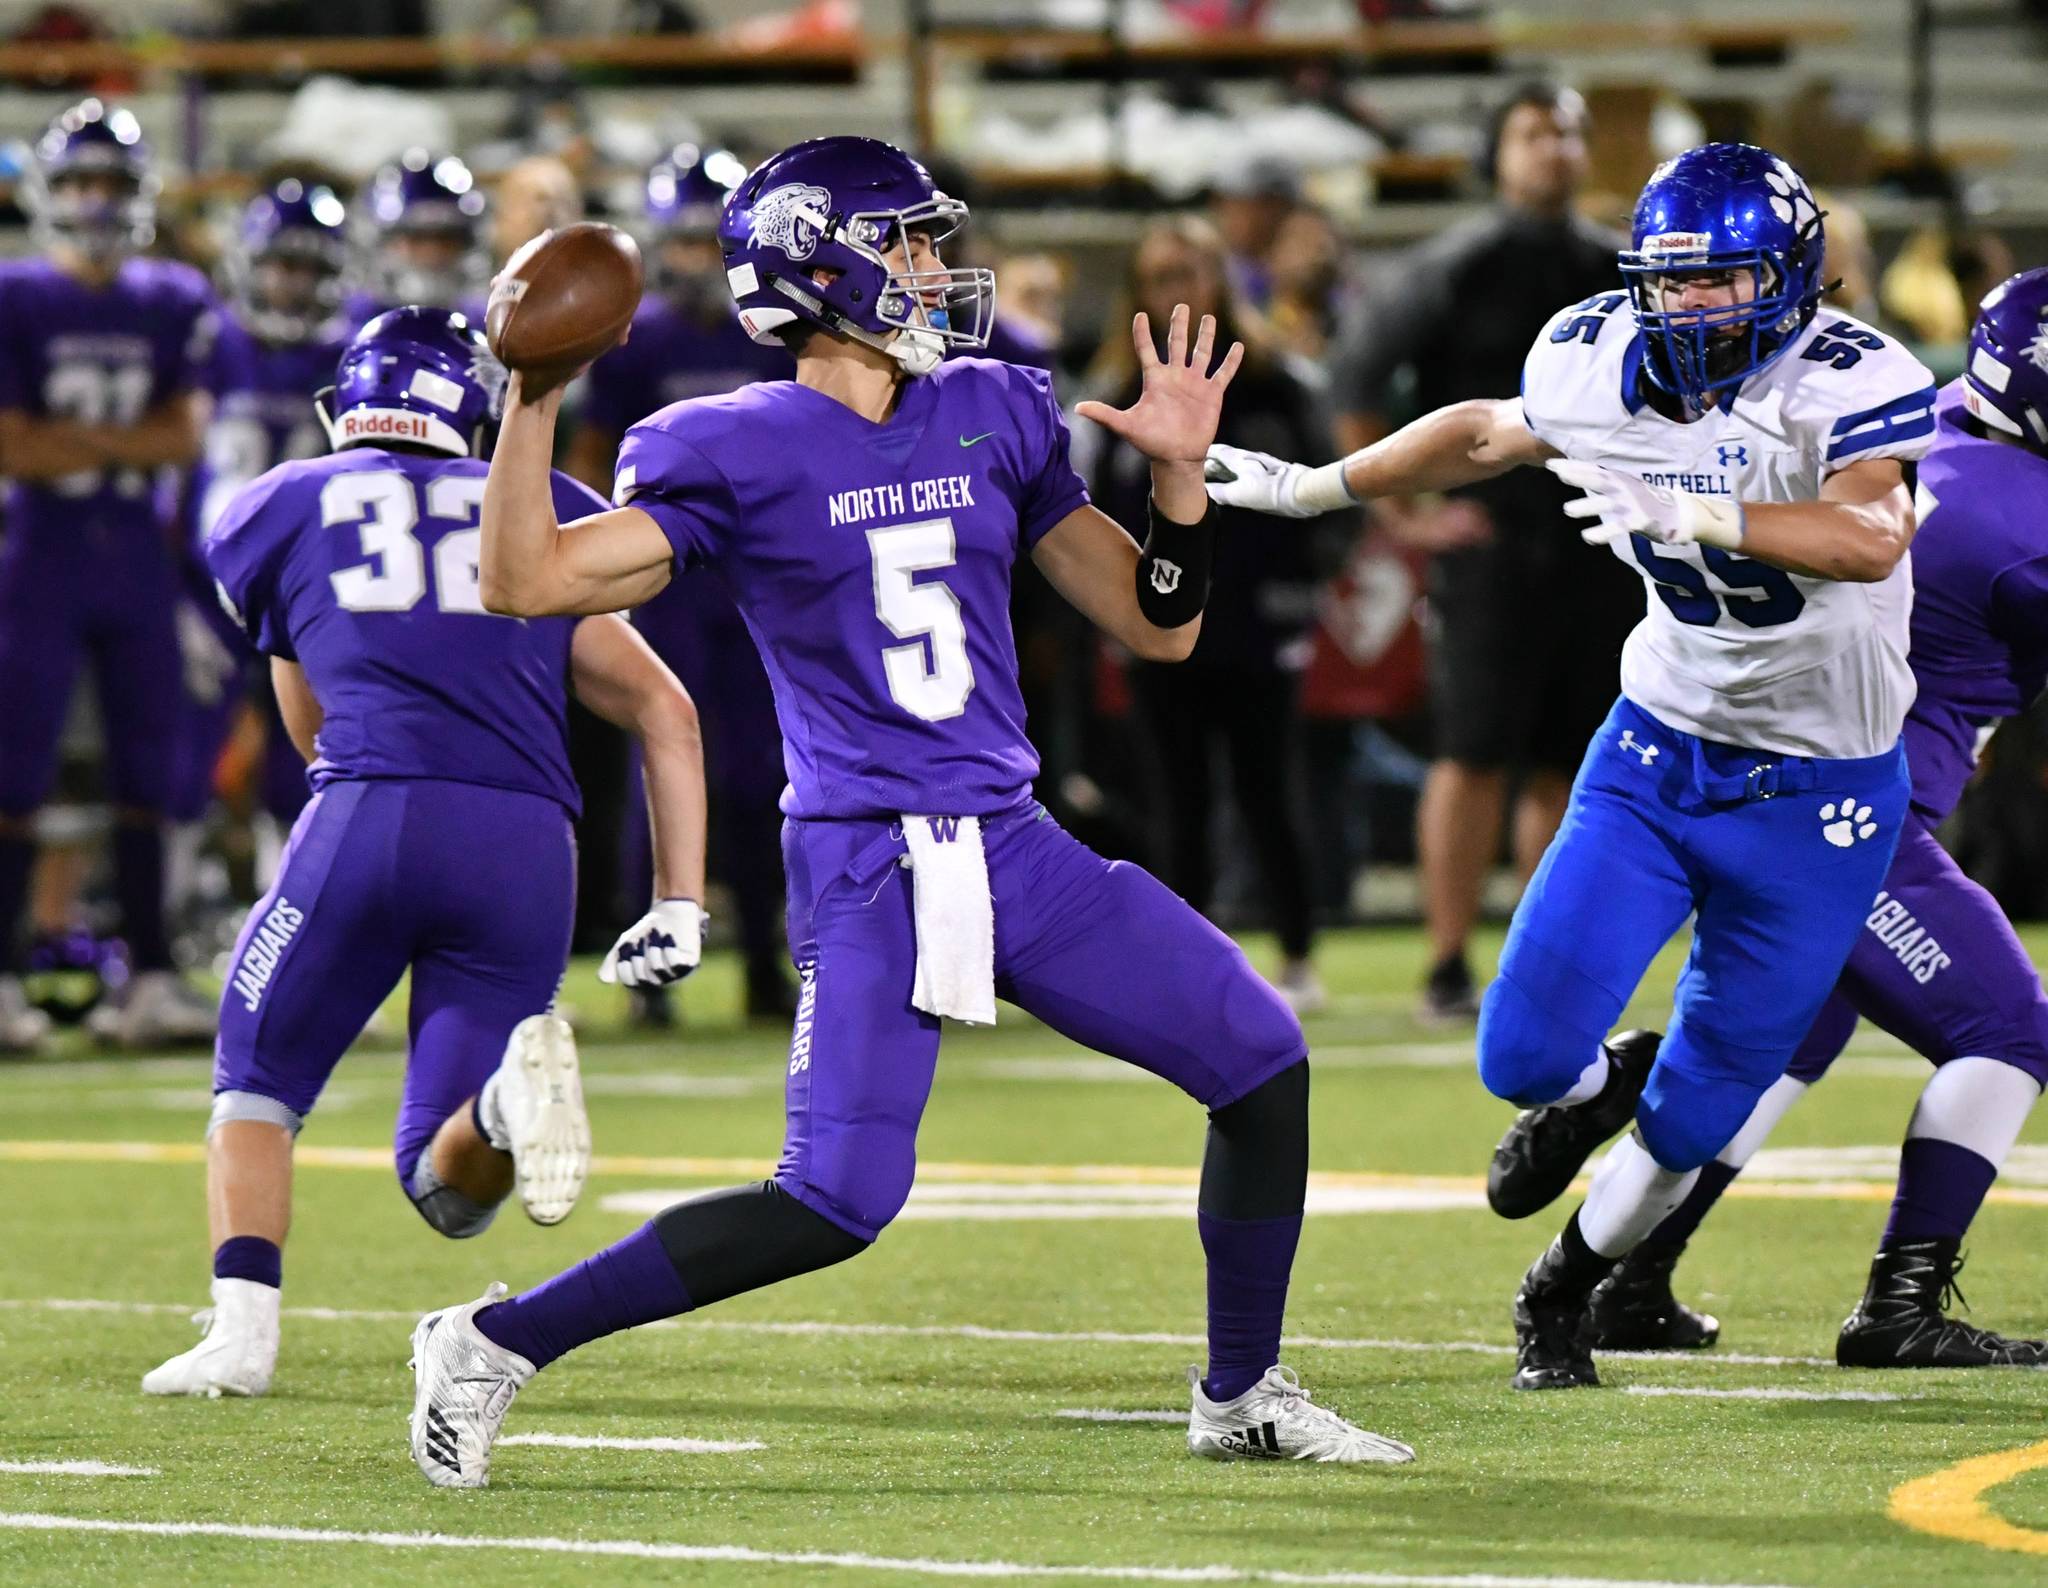 North Creek quarterback Jack Charlton unleashes a pass while Bothell’s Gage Potter closes in. Photo courtesy of Greg Nelson